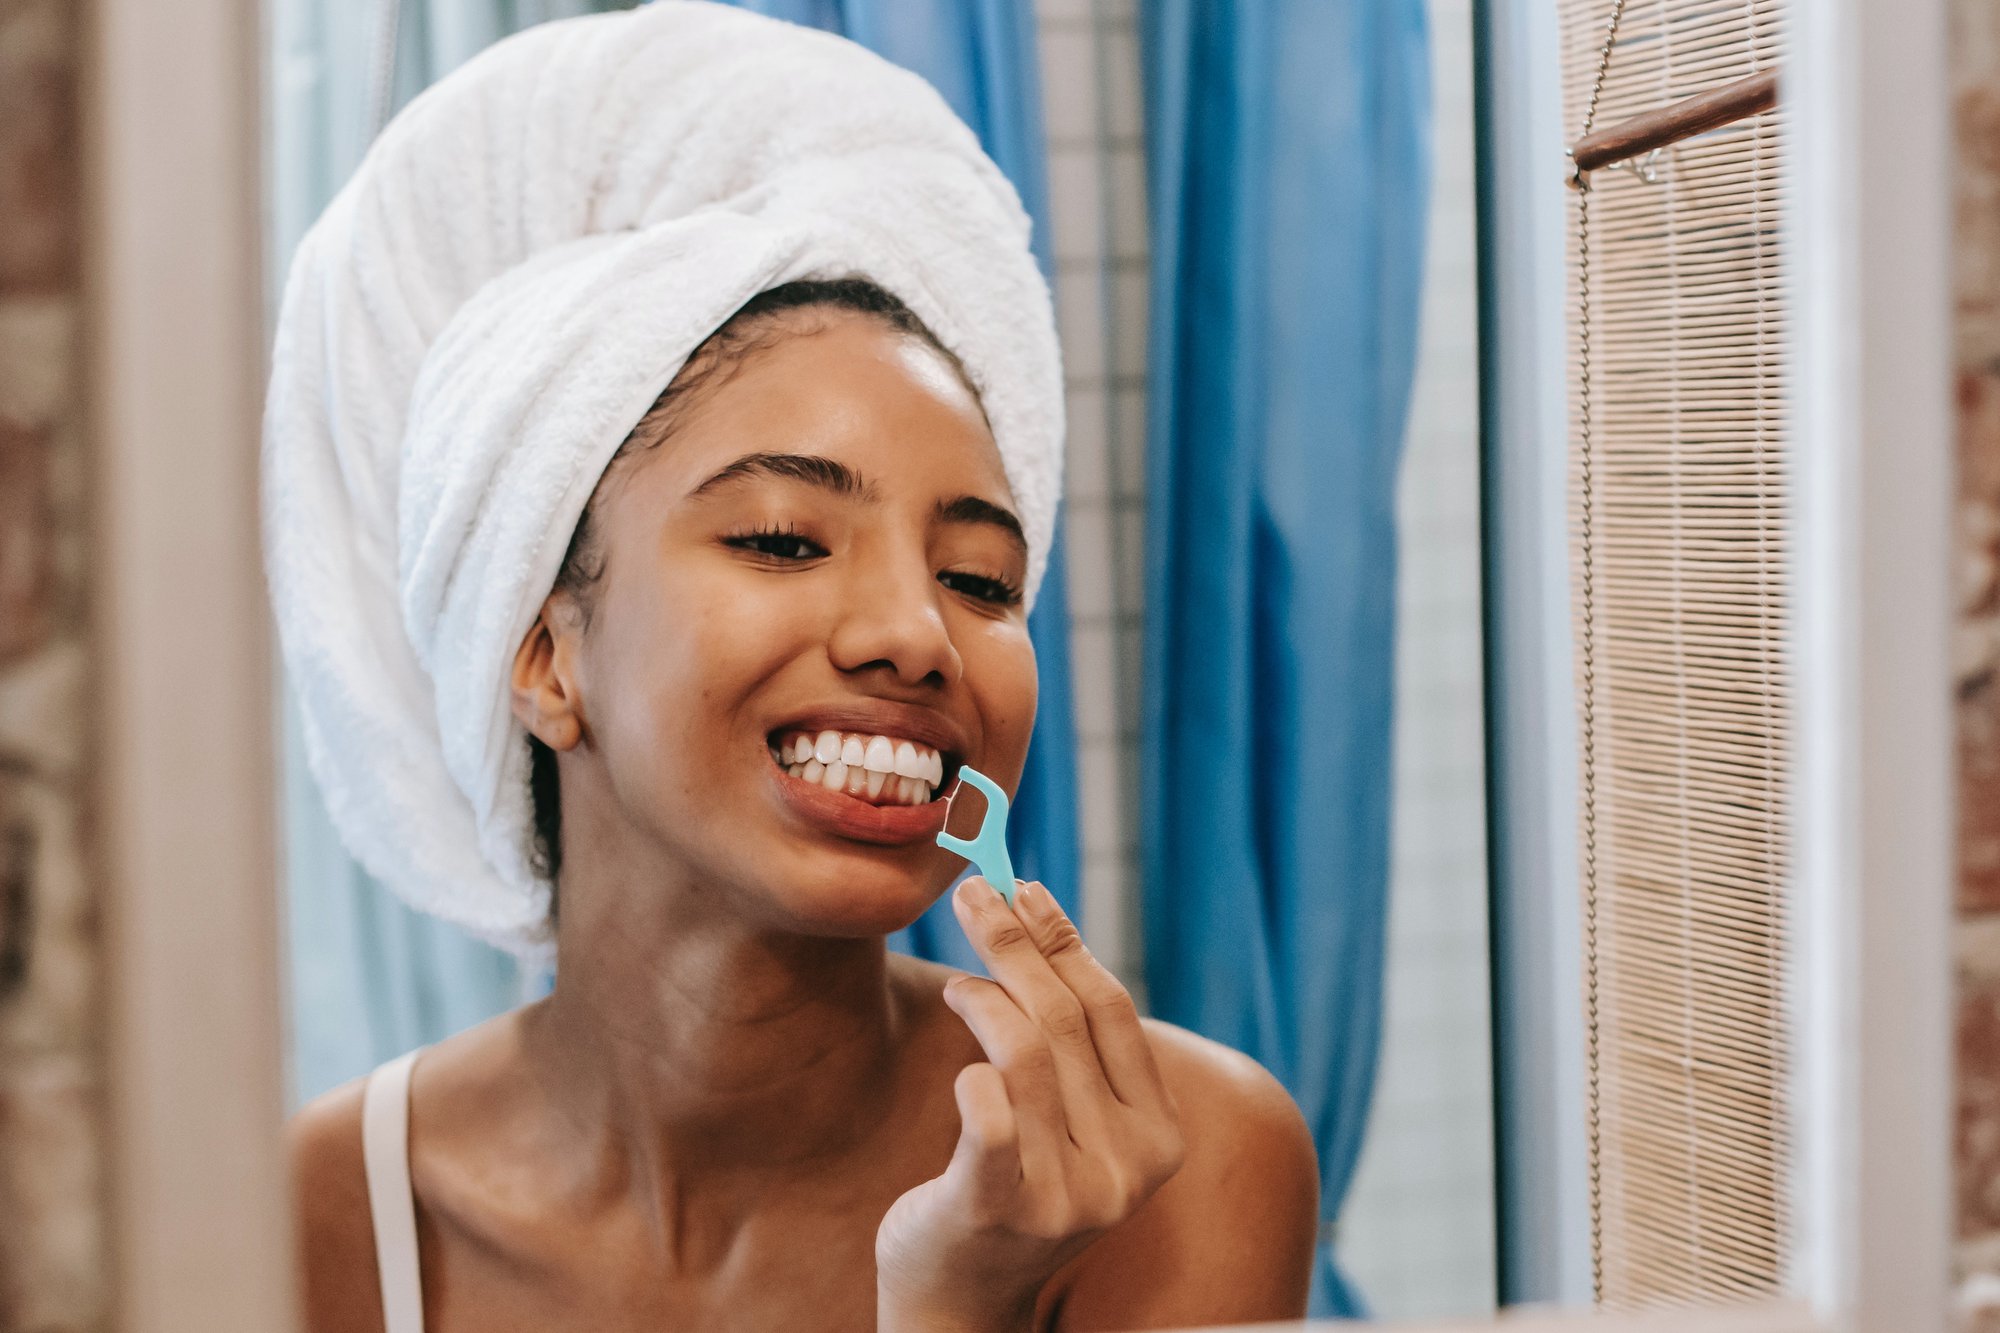 Preventative Dental Care: What Is the Ideal Oral Health Routine?